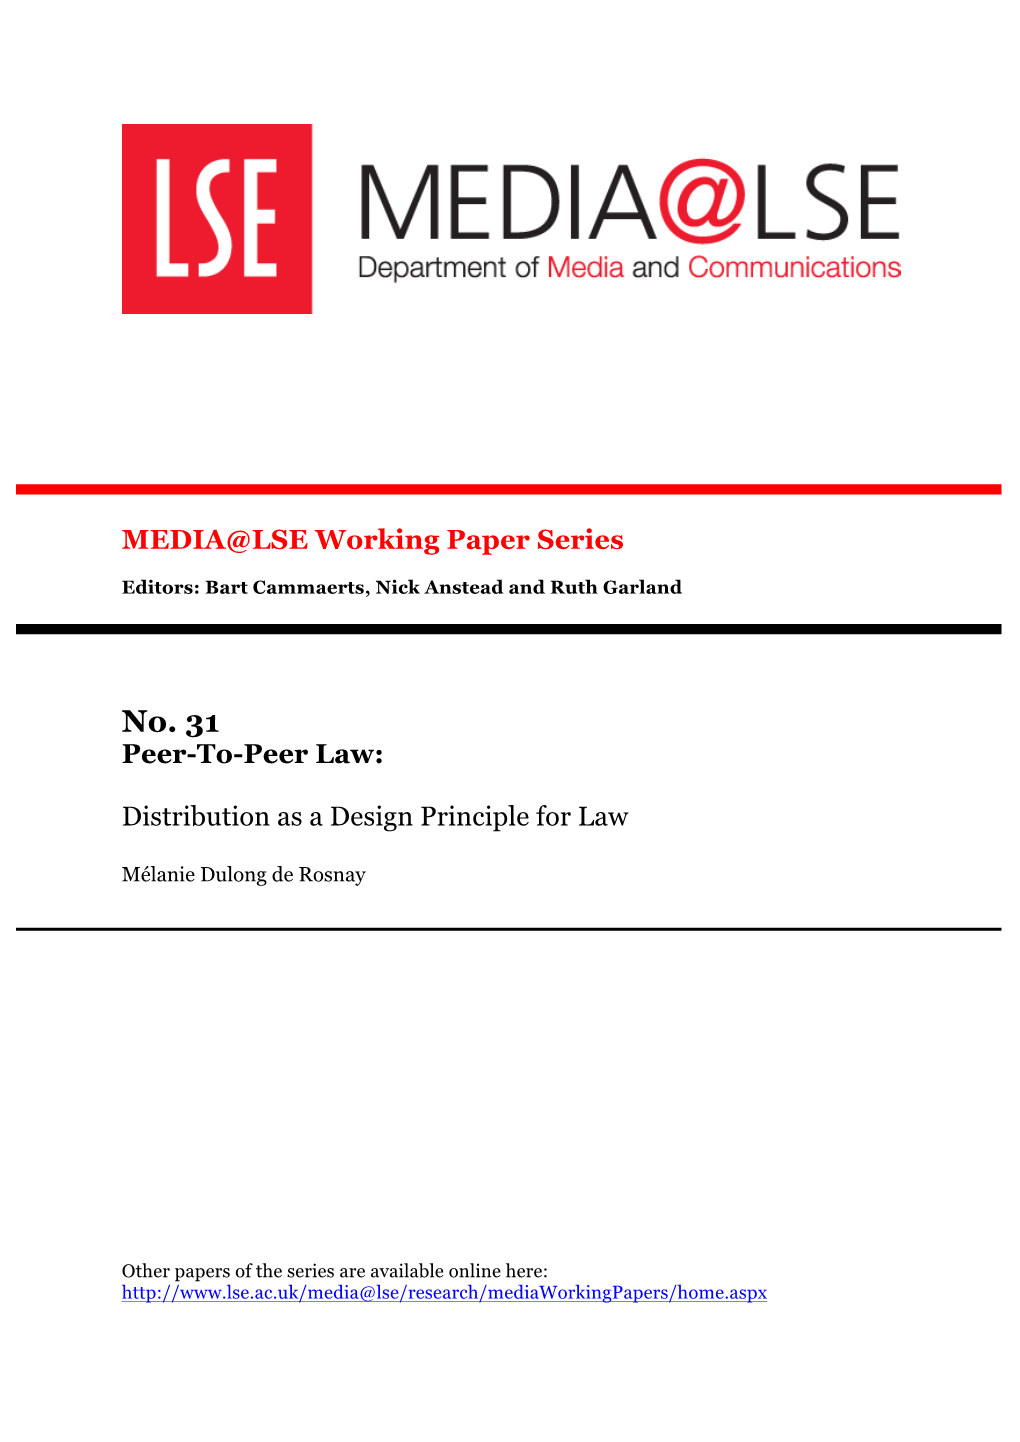 Peer-To-Peer Law: Distribution As a Design Principle for Law, Mélanie Dulong De Rosnay, © 2014